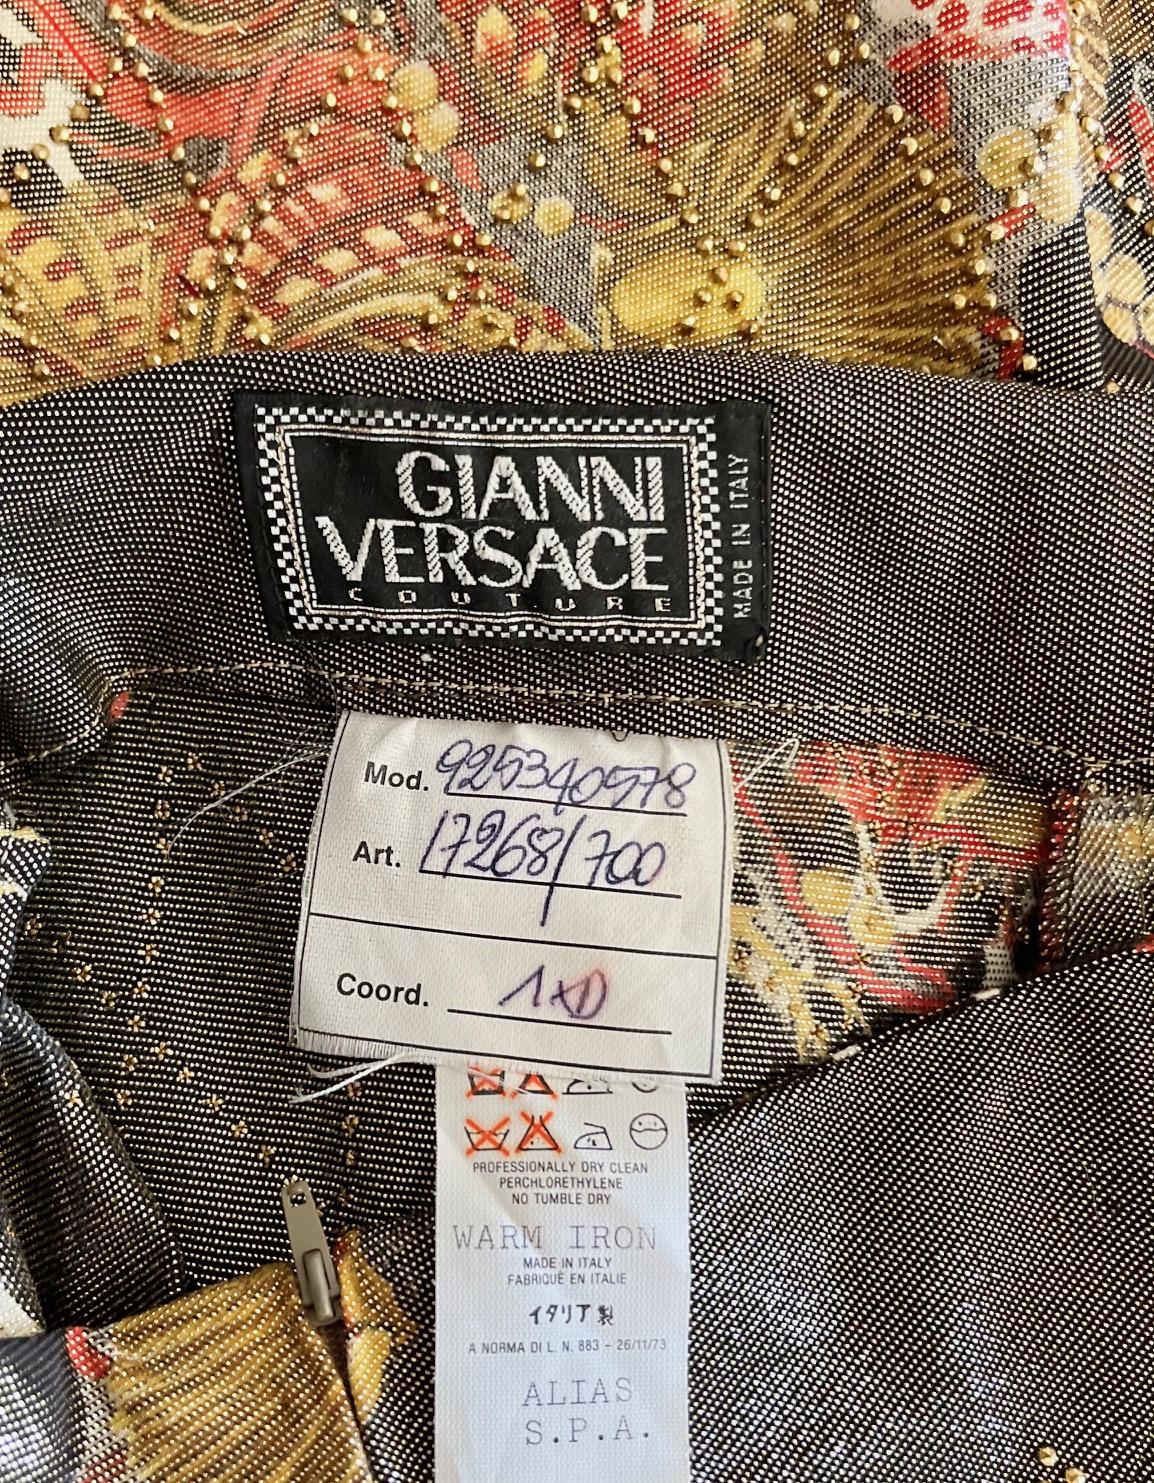 Women's SEASHELL BAROQUE LEGGINGS from MIAMI MANSION GIANNI VERSACE PERSONAL COLLECTION For Sale